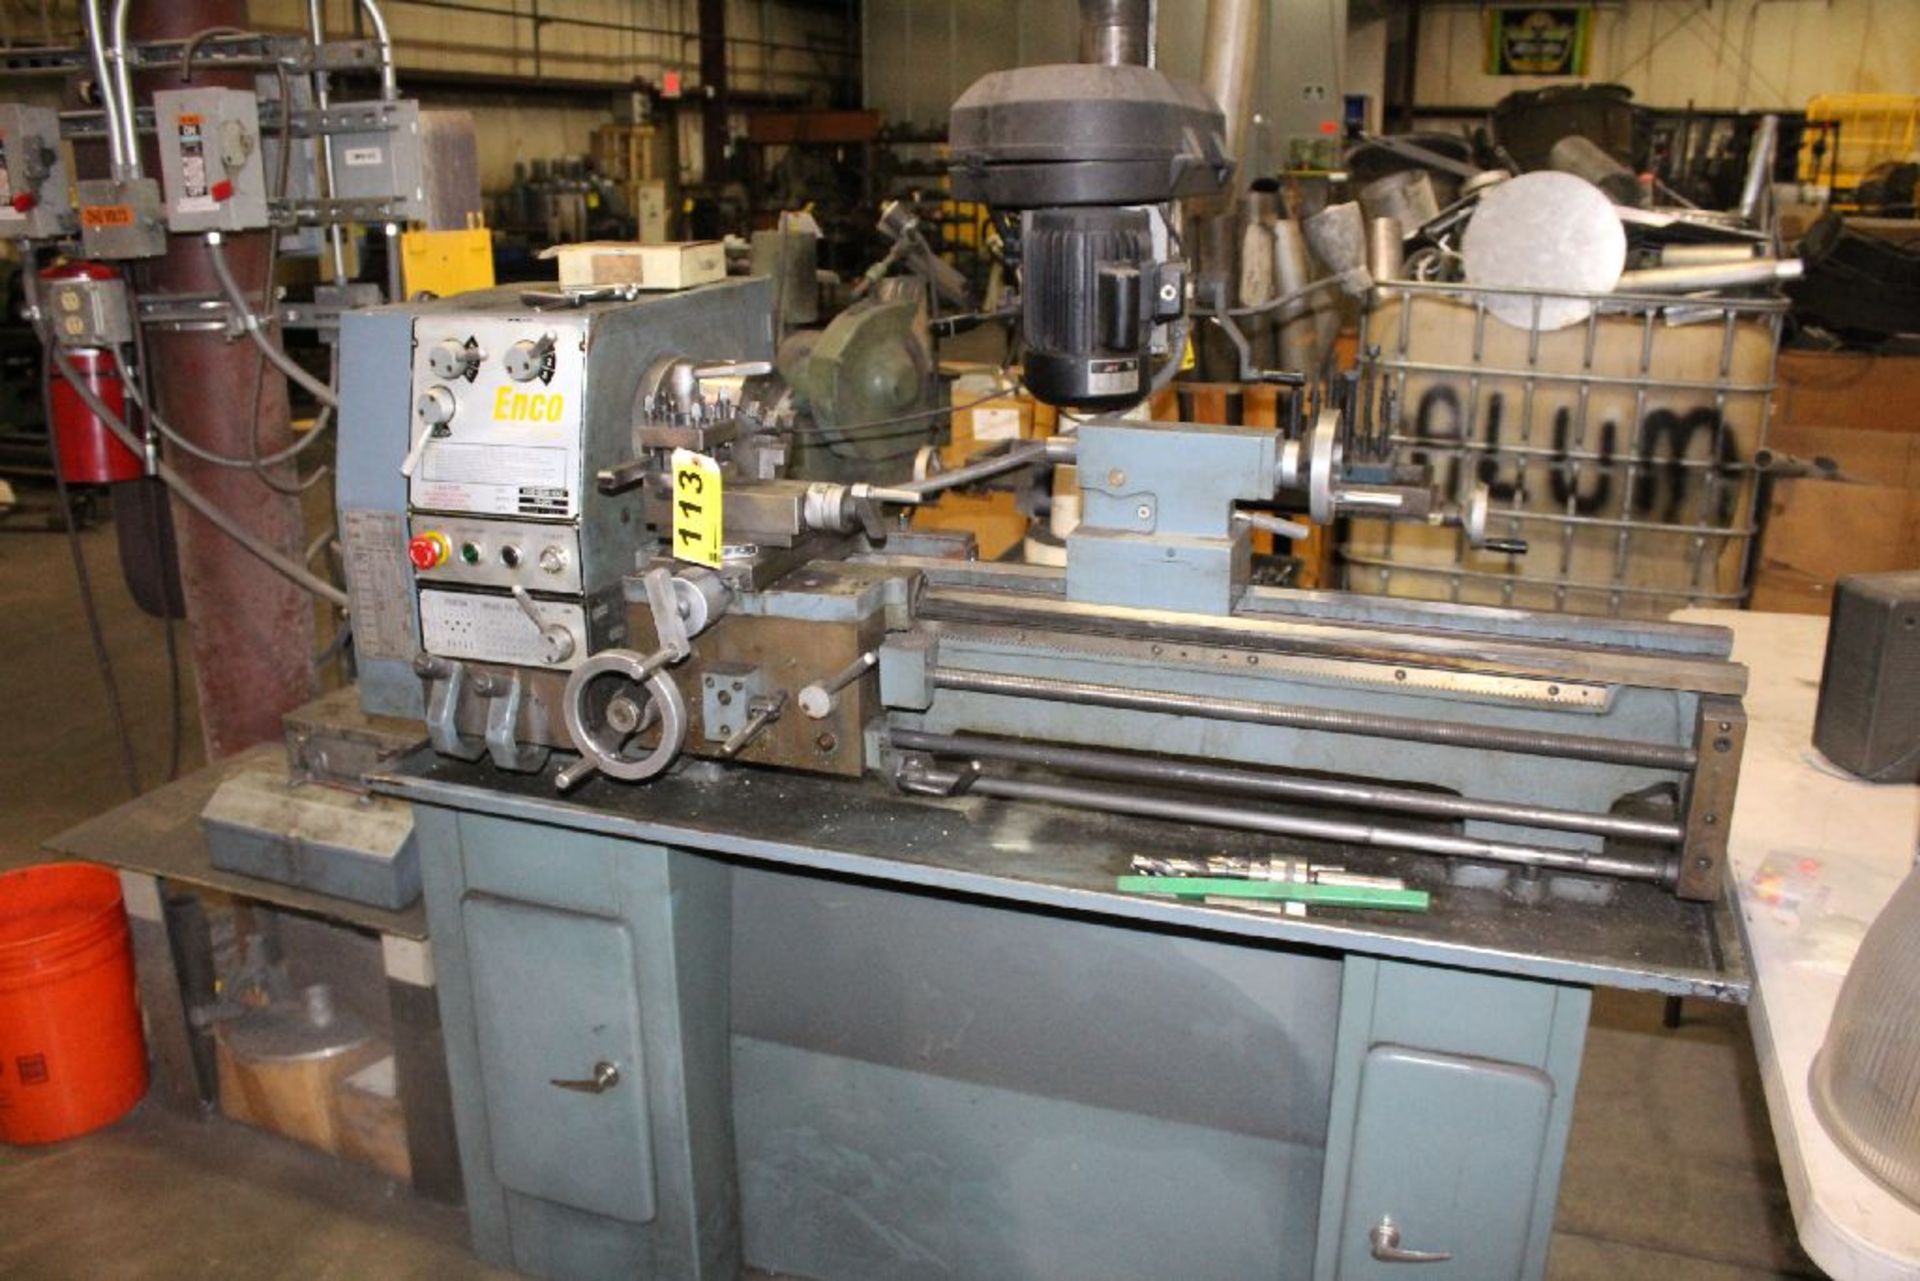 ENCO 12”X36” MODEL 110-2079 TOOLROOM LATHE, S/N 3273620048, 1550 RPM SPINDLE, INCH THREADING, 6”